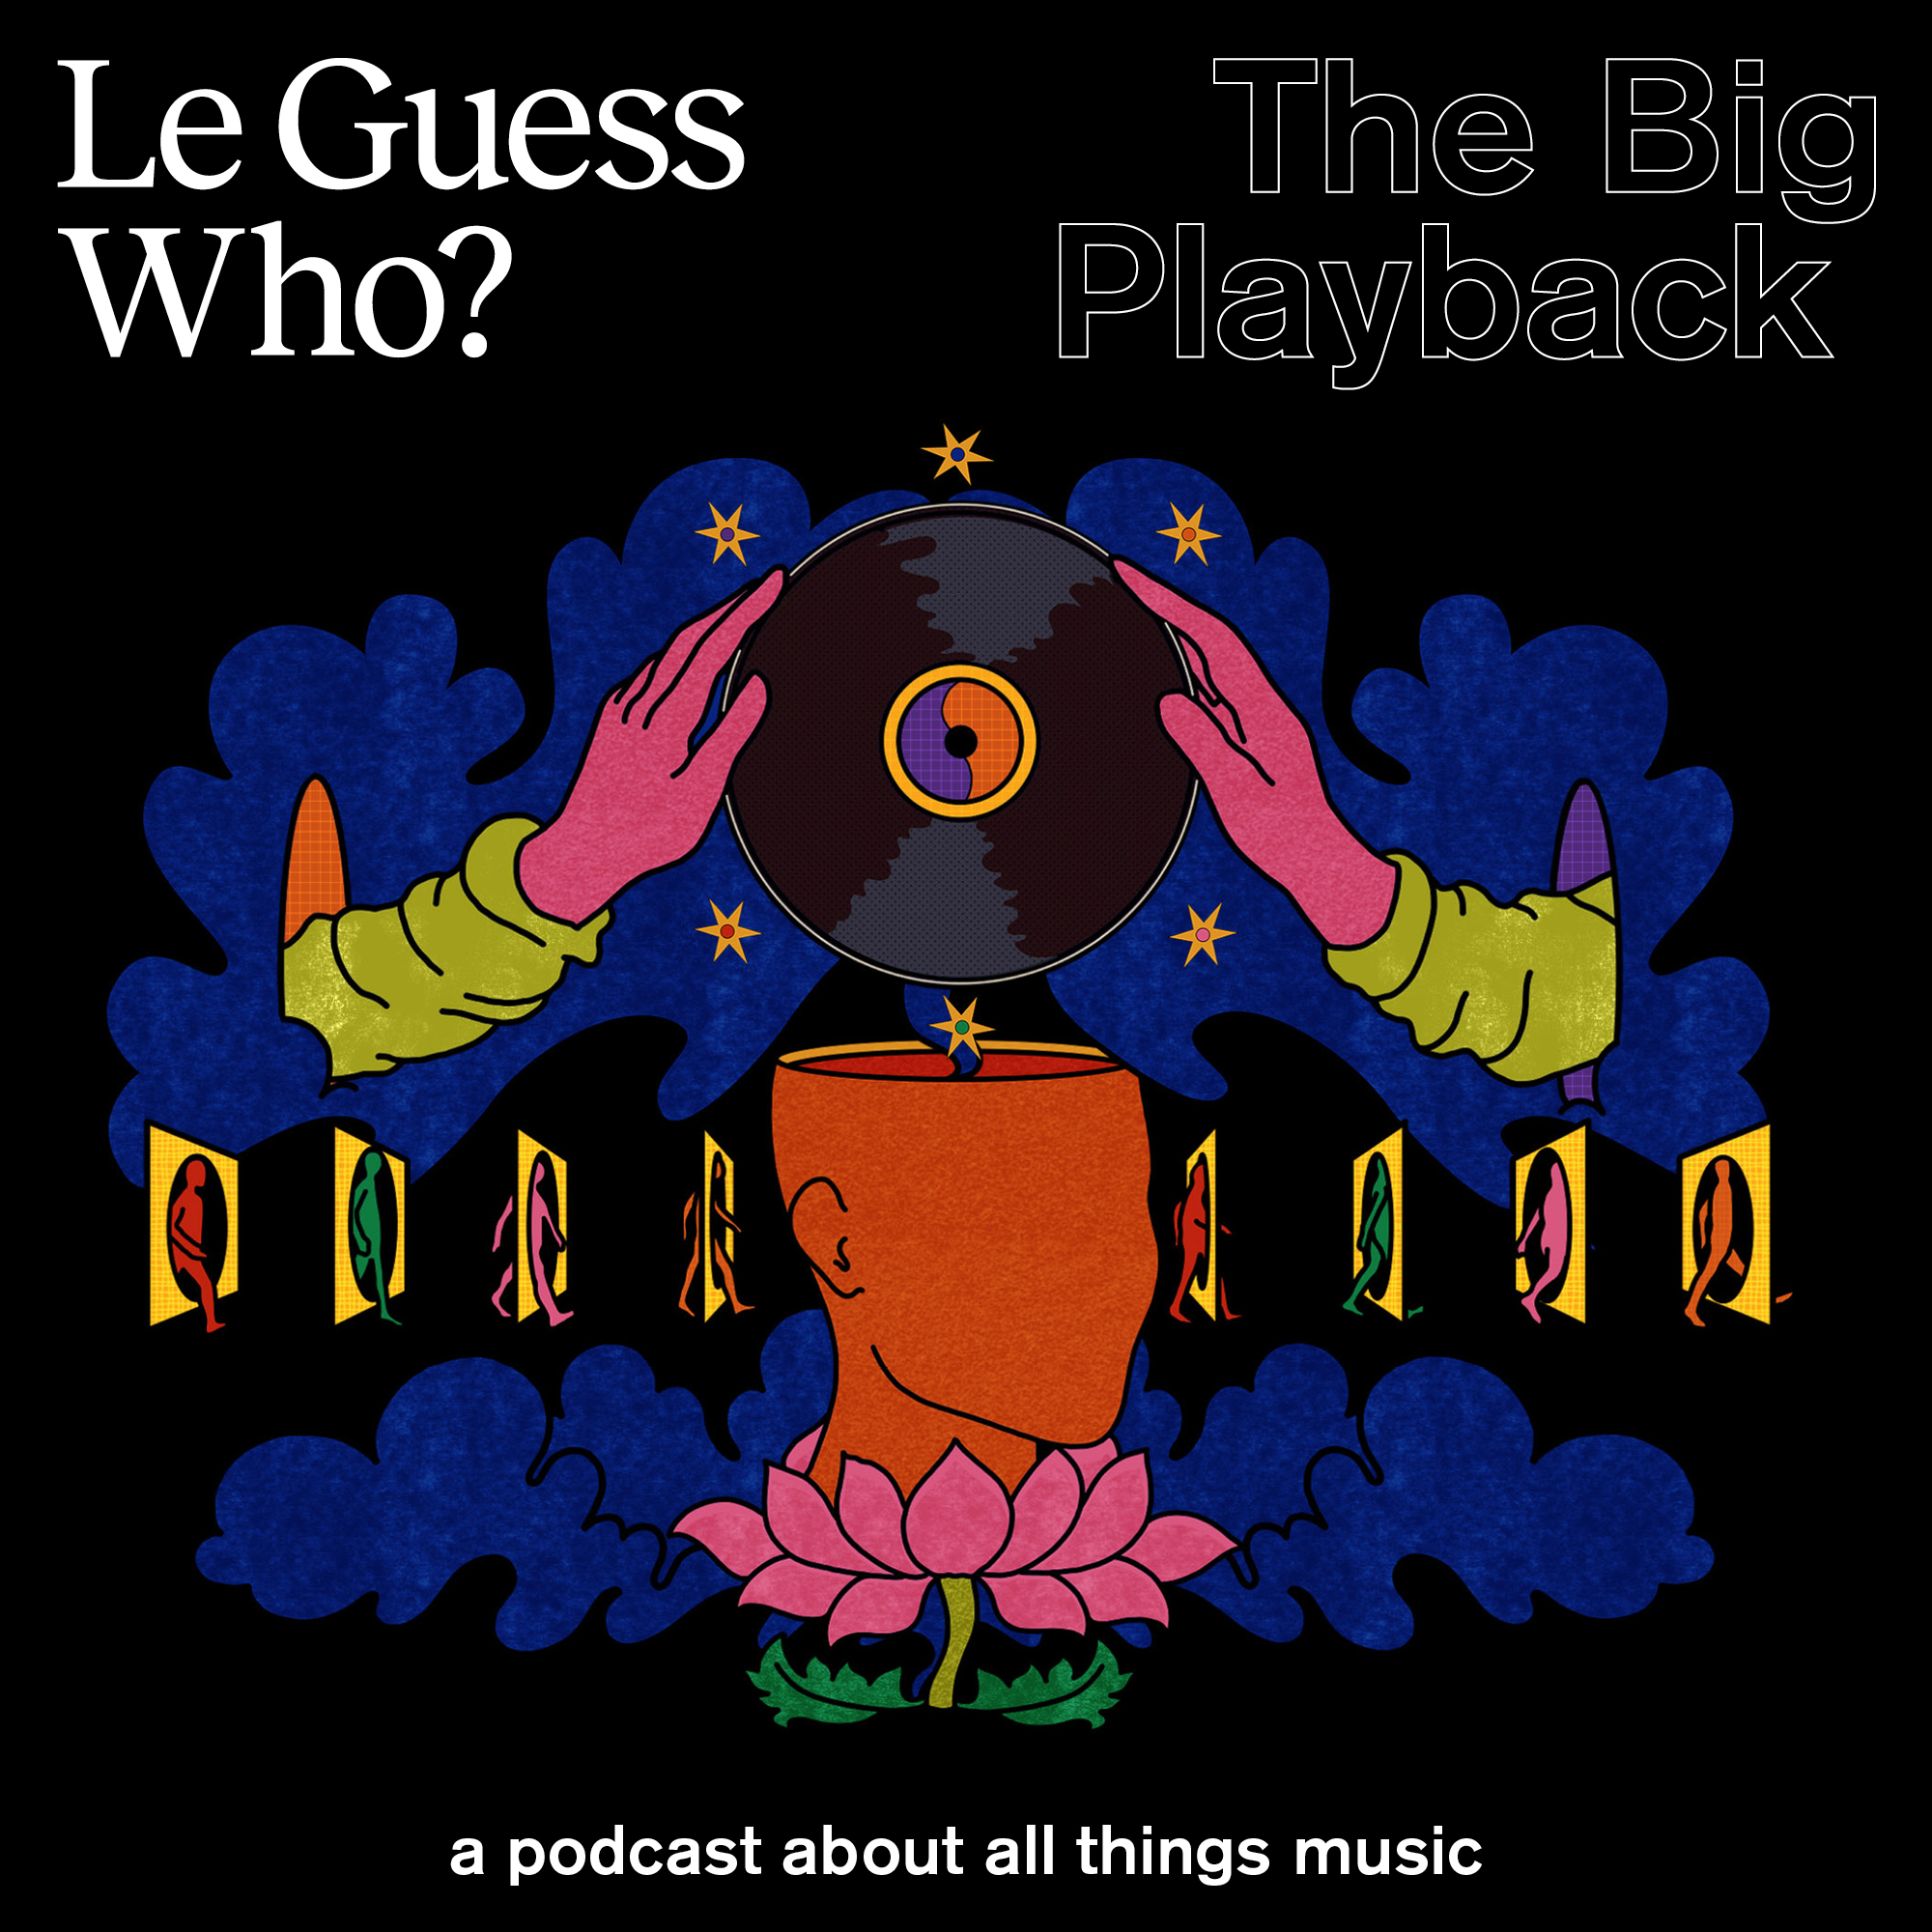 Le Guess Who? presents 'The Big Playback', a podcast about all things music; first episode out now